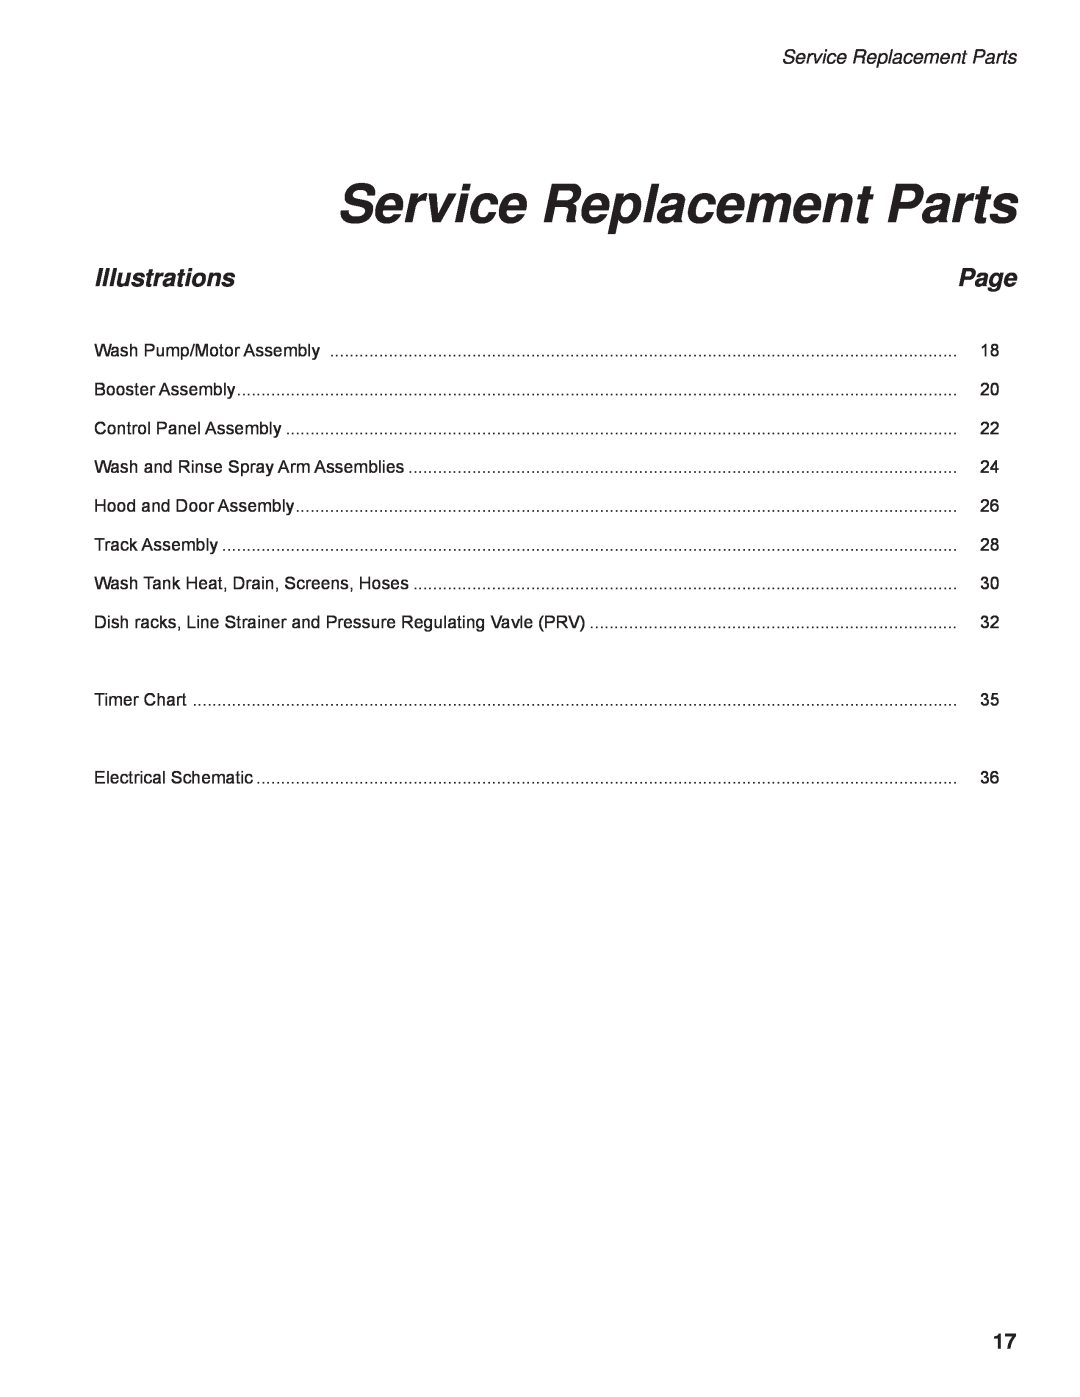 GE DH2000 operation manual Service Replacement Parts, Illustrations, Page 